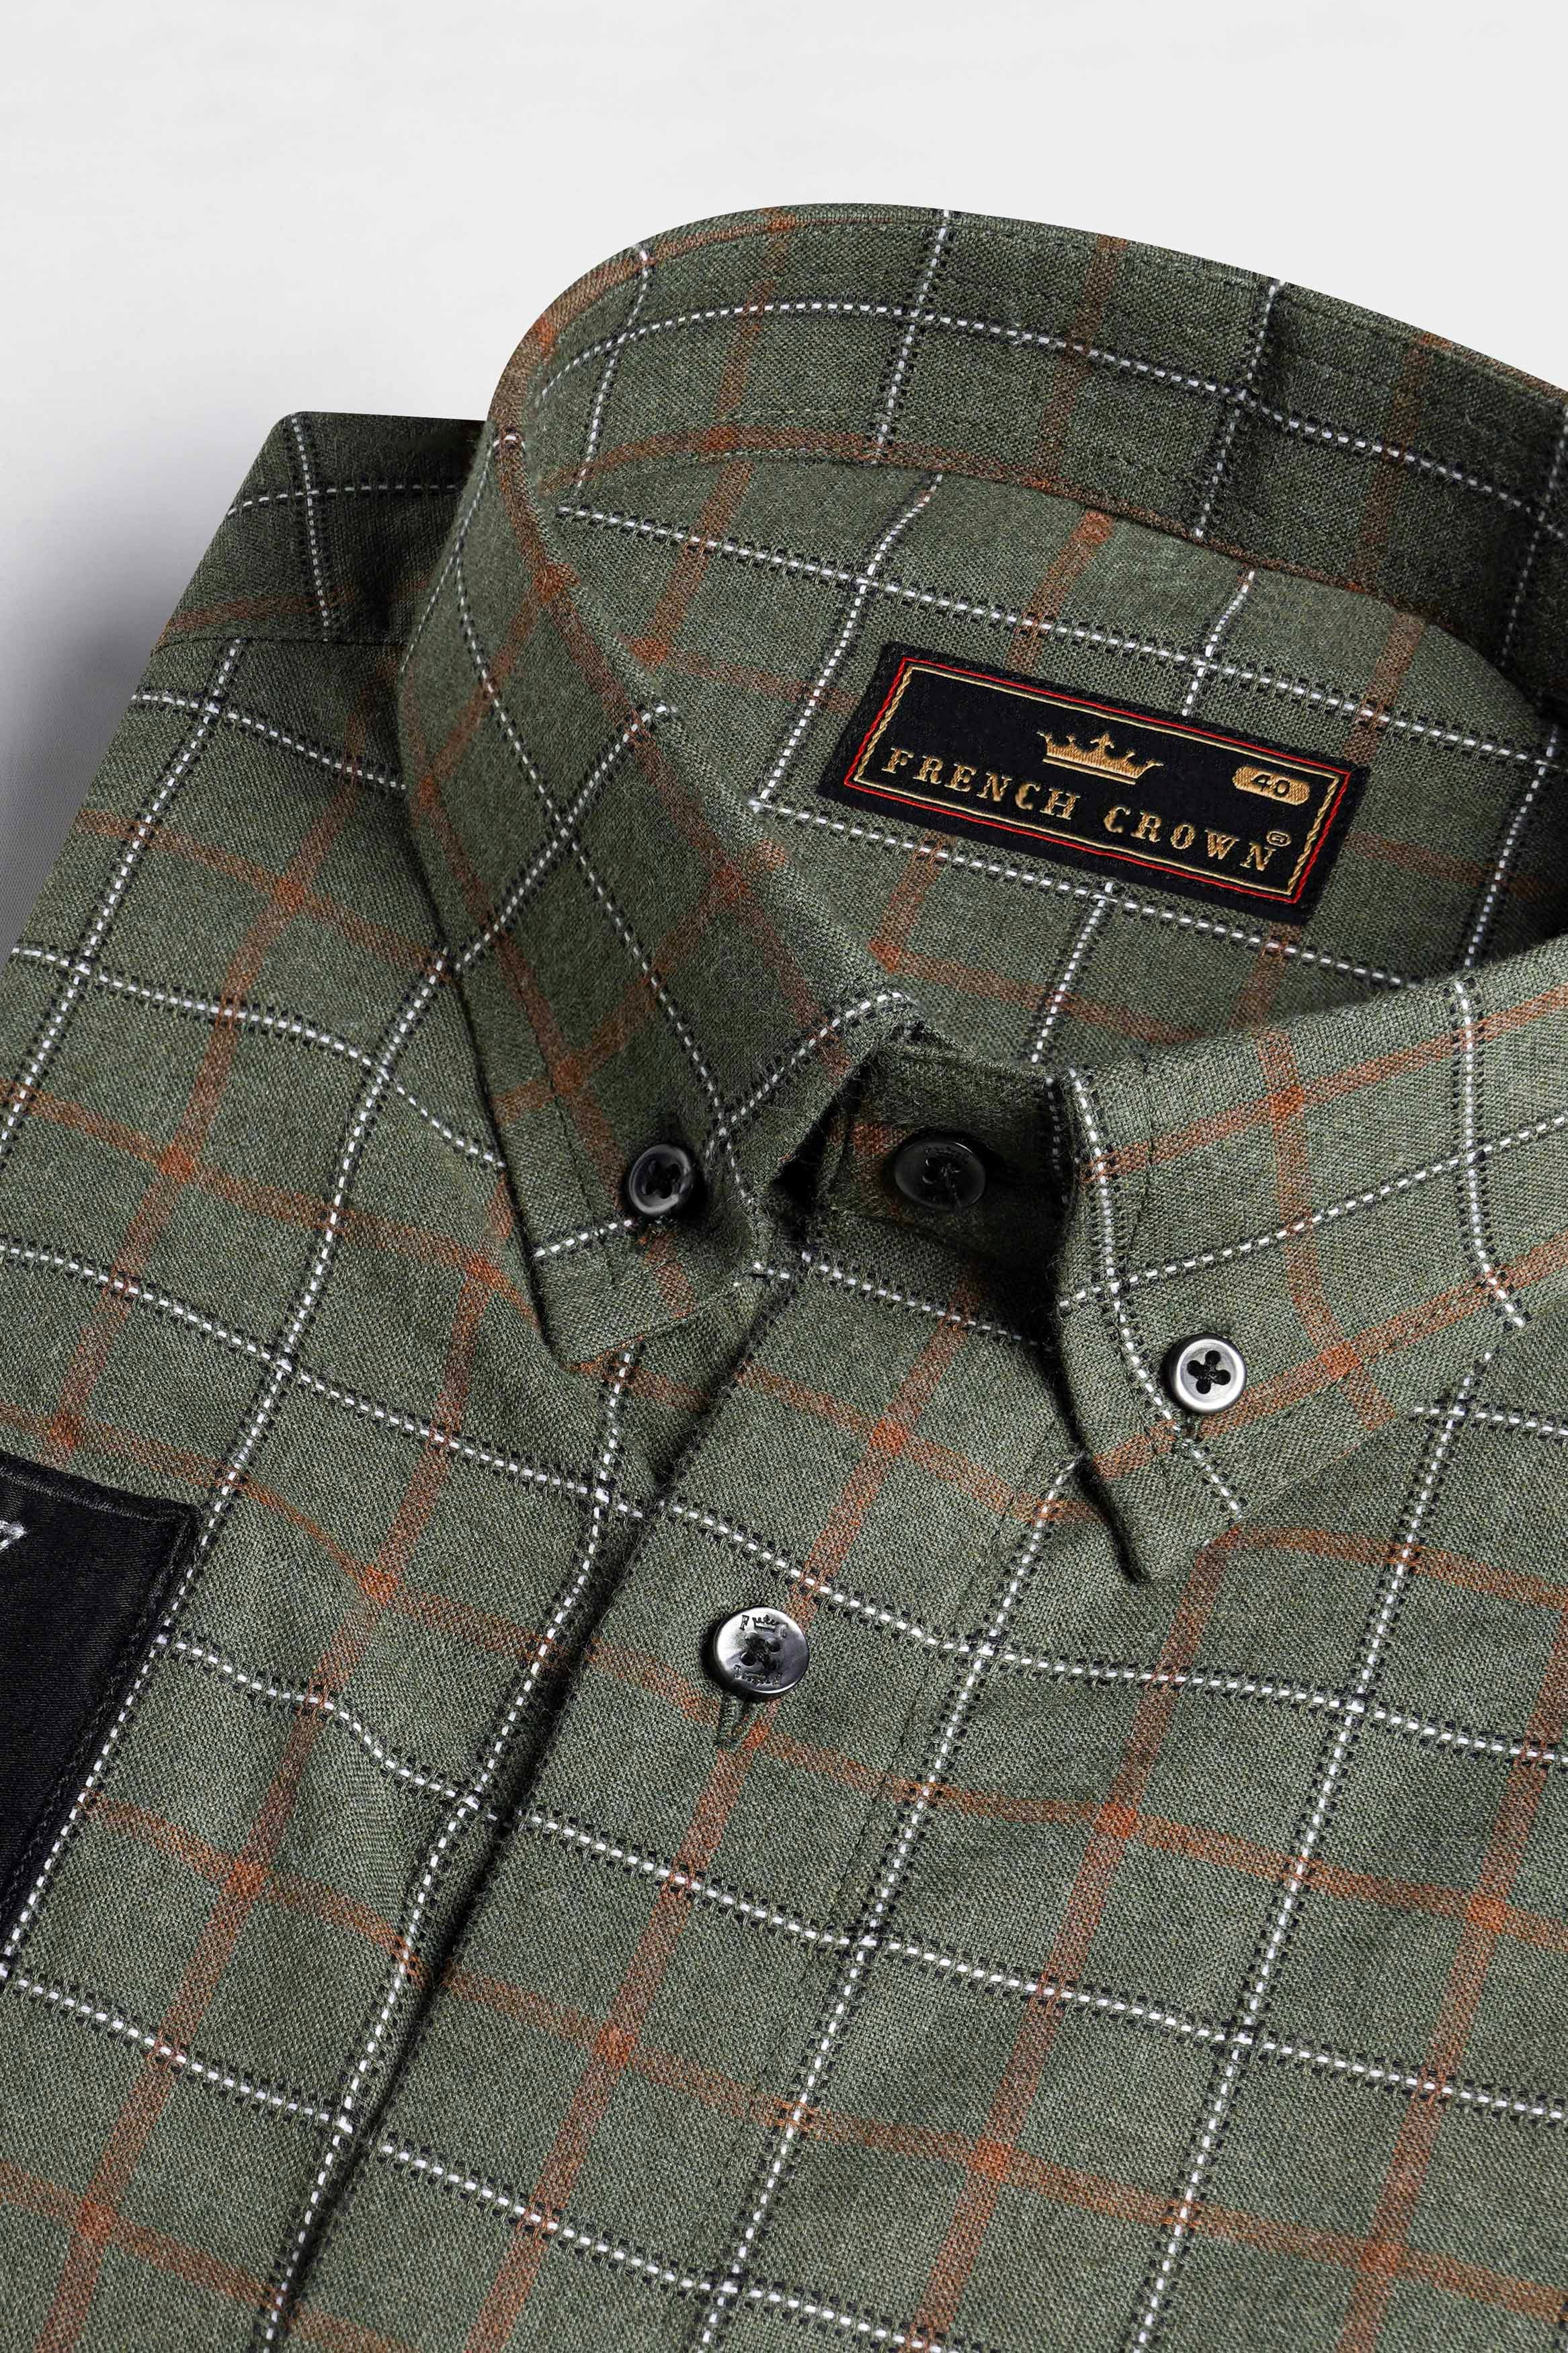 Stonewall Green and Brownish Checkered with Funky Patchwork Dobby Textured Premium Giza Cotton Designer Shirt 7840-BD-BLK-E164-38, 7840-BD-BLK-E164-H-38, 7840-BD-BLK-E164-39, 7840-BD-BLK-E164-H-39, 7840-BD-BLK-E164-40, 7840-BD-BLK-E164-H-40, 7840-BD-BLK-E164-42, 7840-BD-BLK-E164-H-42, 7840-BD-BLK-E164-44, 7840-BD-BLK-E164-H-44, 7840-BD-BLK-E164-46, 7840-BD-BLK-E164-H-46, 7840-BD-BLK-E164-48, 7840-BD-BLK-E164-H-48, 7840-BD-BLK-E164-50, 7840-BD-BLK-E164-H-50, 7840-BD-BLK-E164-52, 7840-BD-BLK-E164-H-52